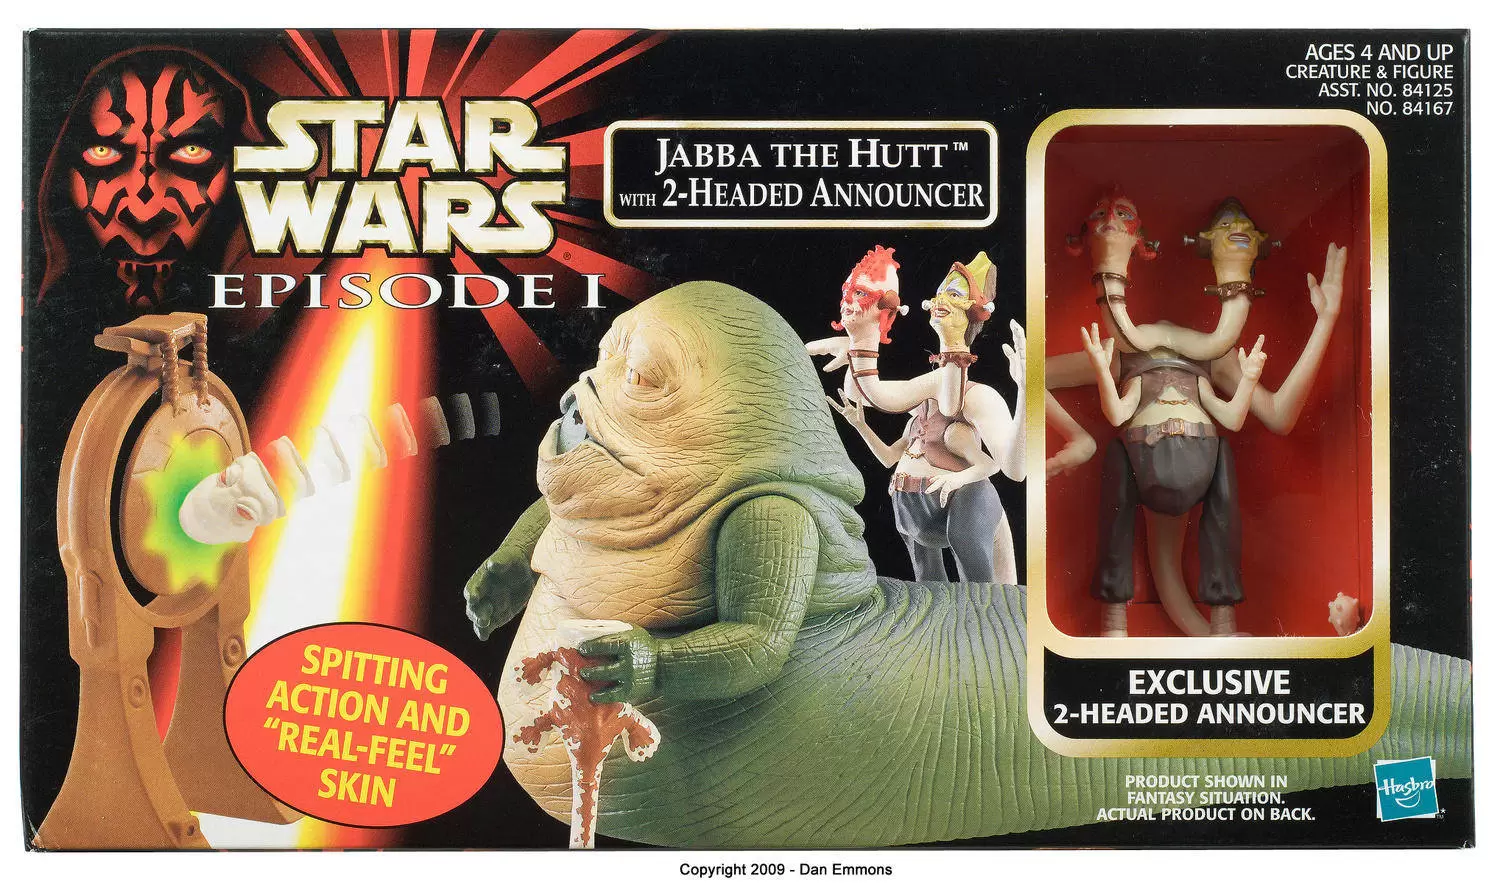 Episode 1 - Jabba the Hutt with 2-Headed Announcer figure